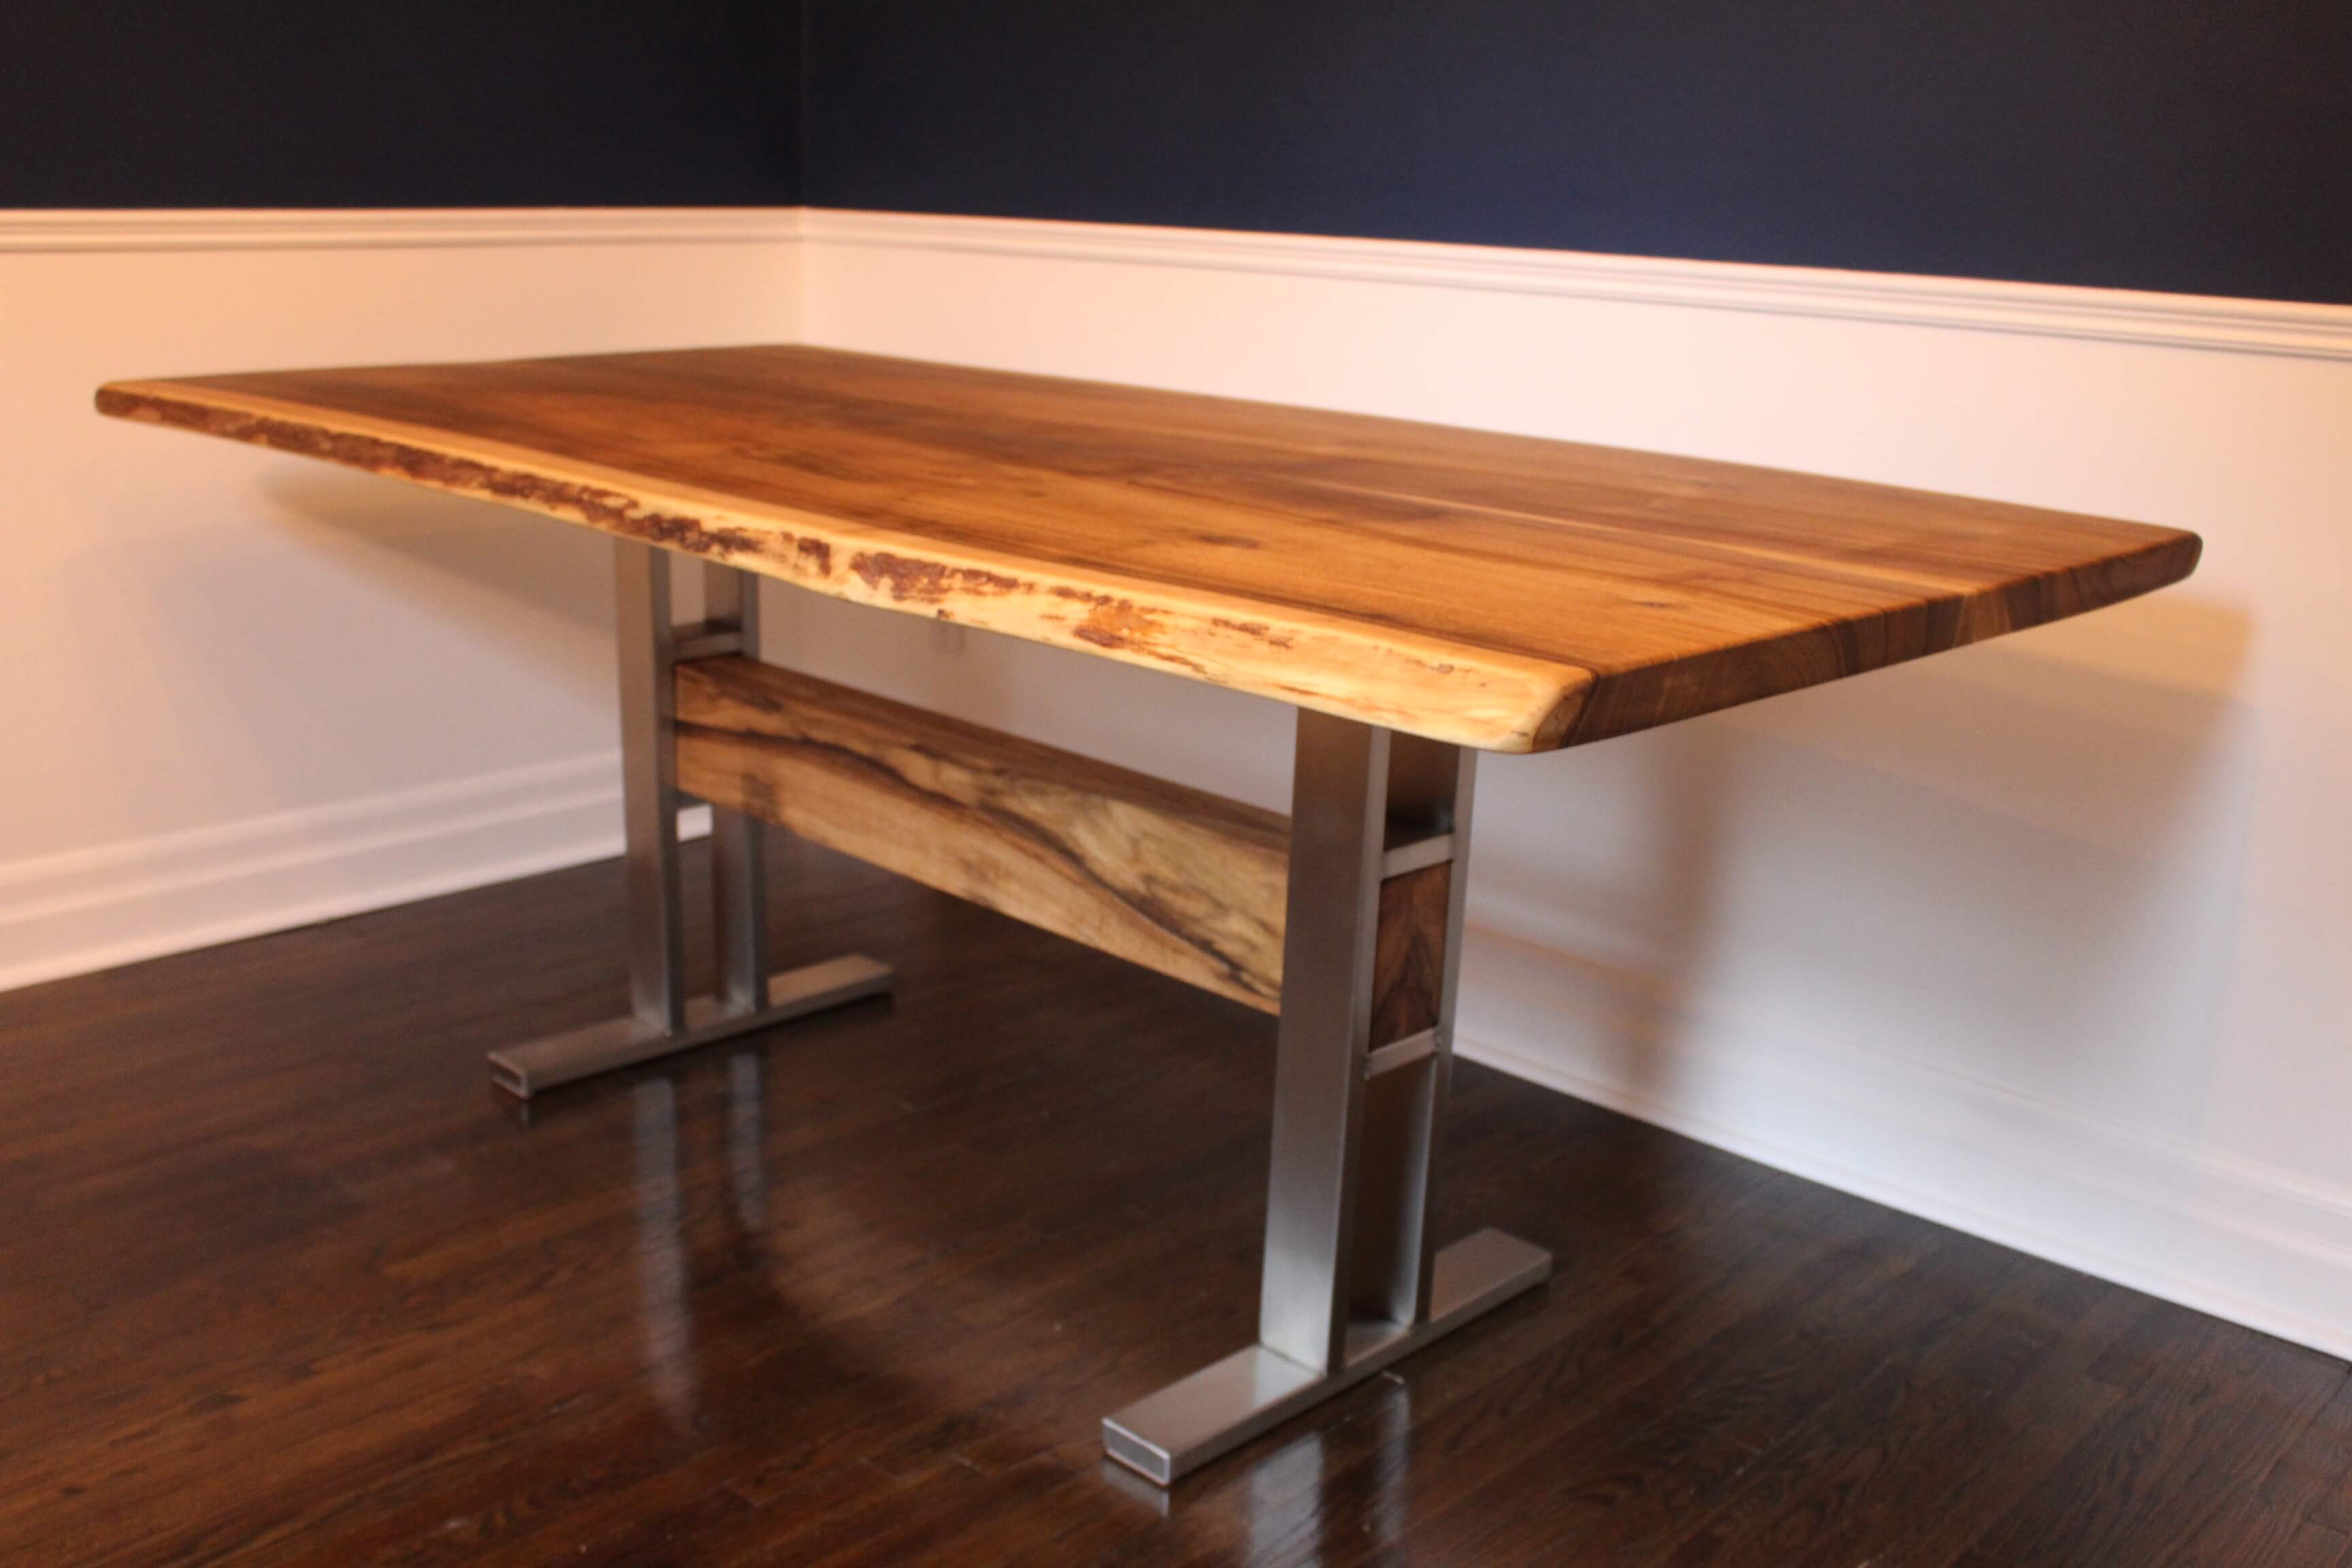 live edge walnut table with stainless steel trestle base with wood beam, made in muskoka, ships to NYC and toronto